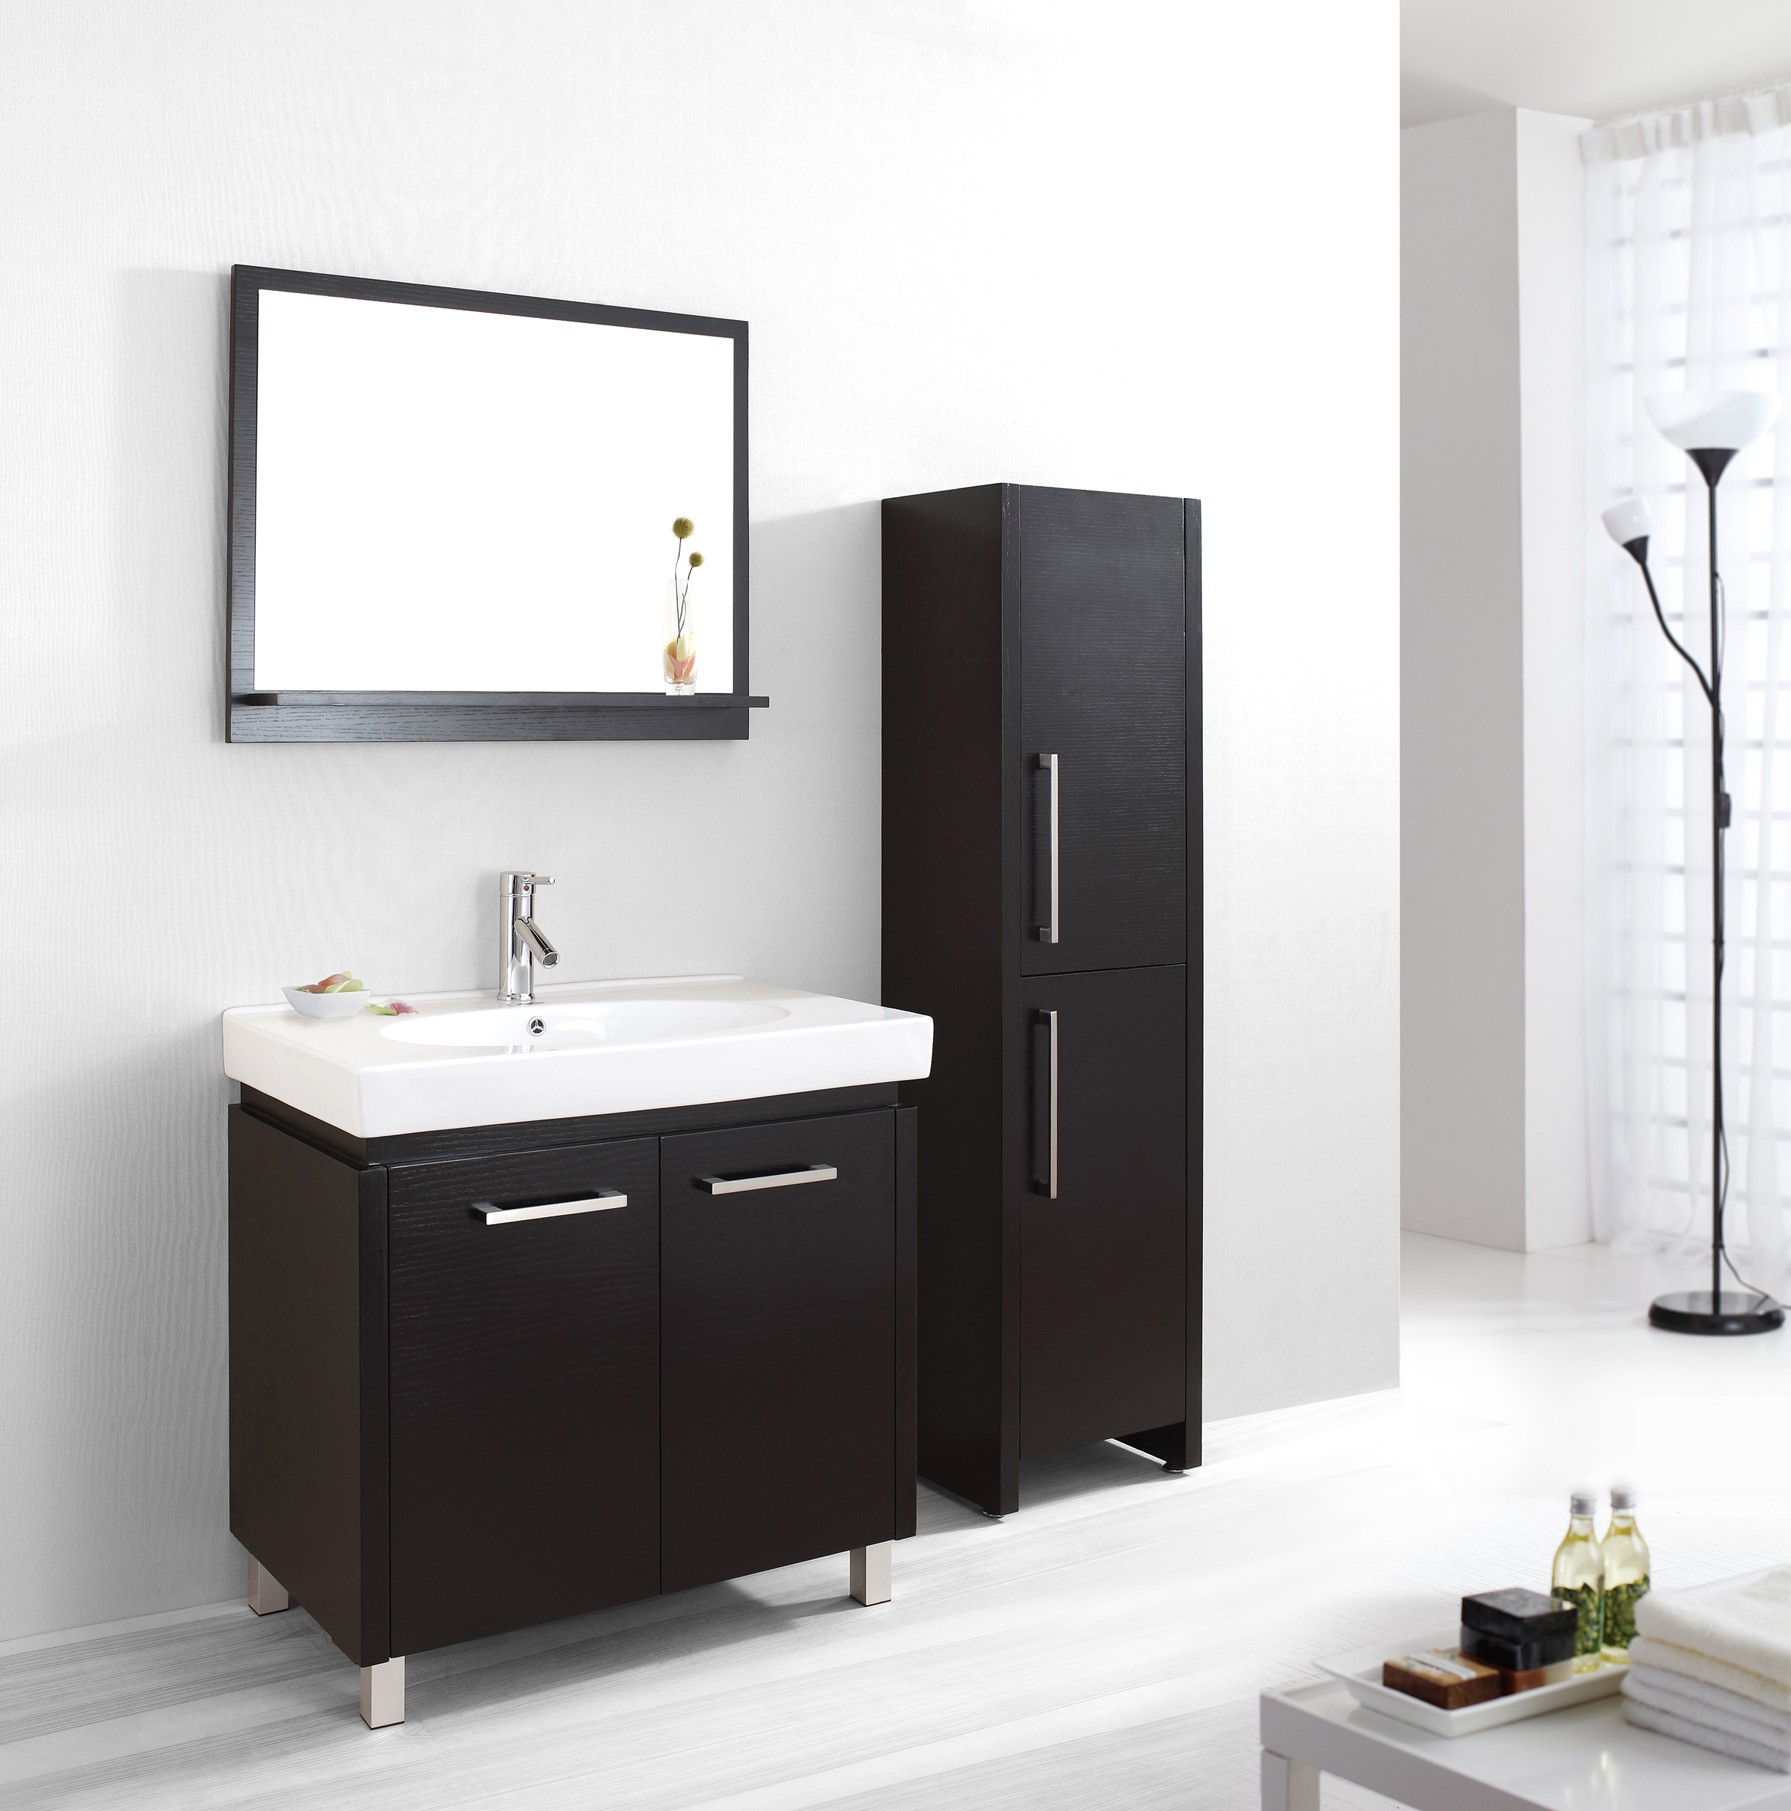 Fascinating Storage Cabinets For Small Bathroom Design pertaining to sizing 1791 X 1811